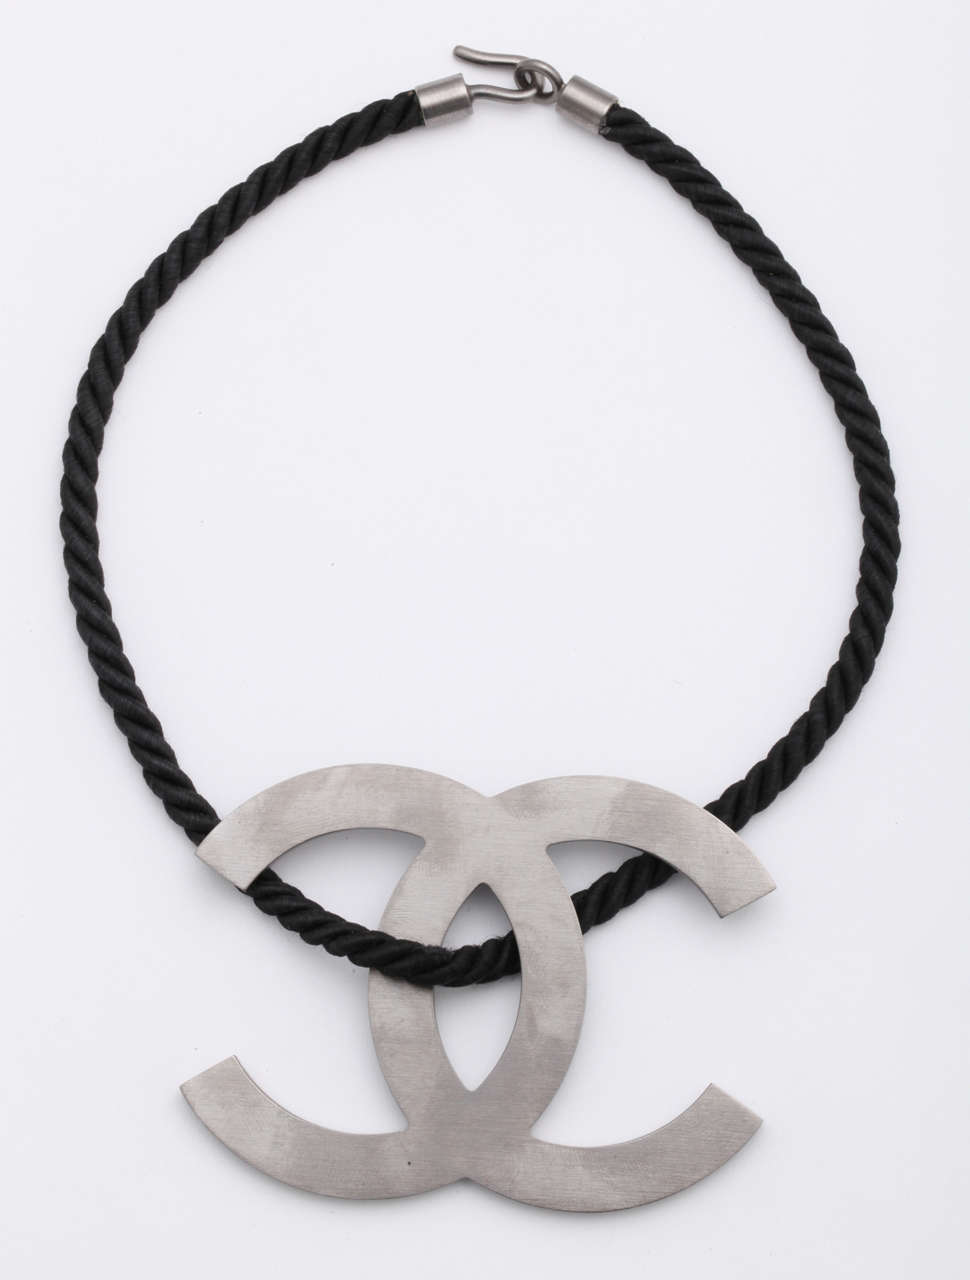 Very rare Chanel large croc embossed CC logo necklace. Silver and black.